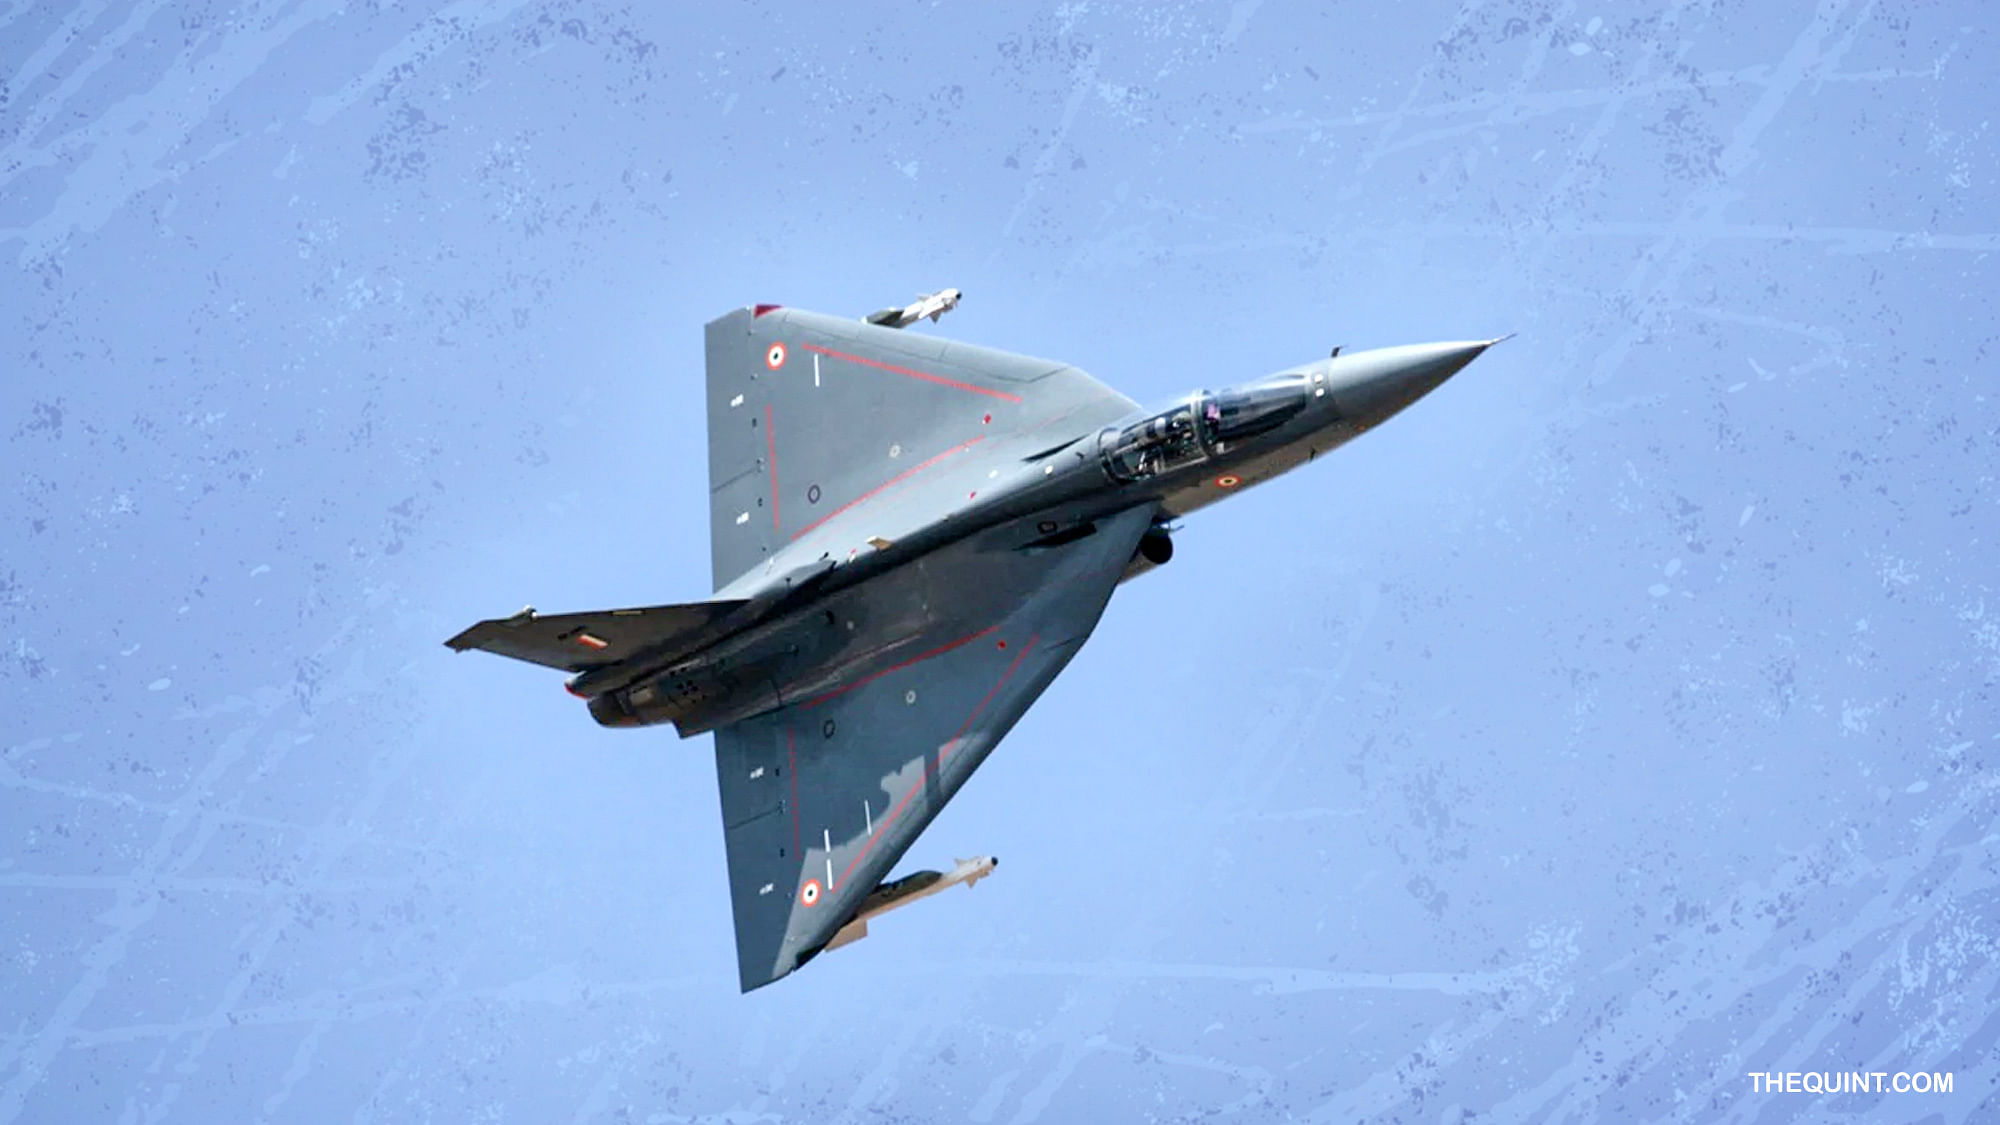 The fight really is between the home-grown and home designed Tejas and foreign Swedish maal, writes Bharat Karnad.&nbsp;